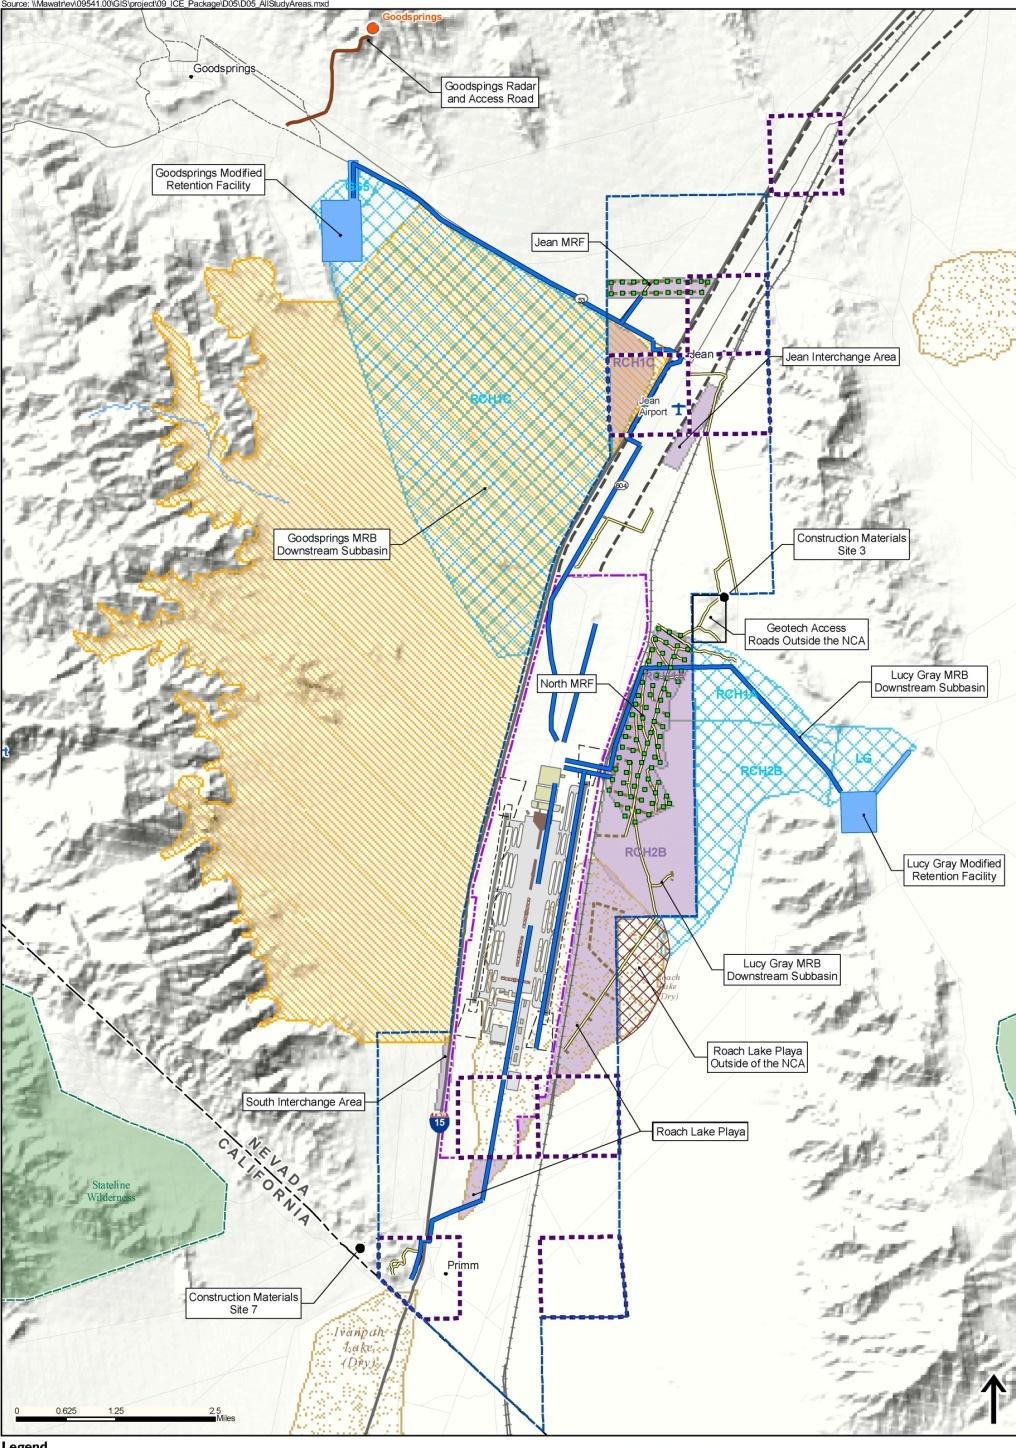 Proposed Ivanpah Valley Airport Retention Basin Transportation /Utility Downstream of Basin Construction Materials Site 6,000 acre airport site + 17,000 acres noise compatibility +